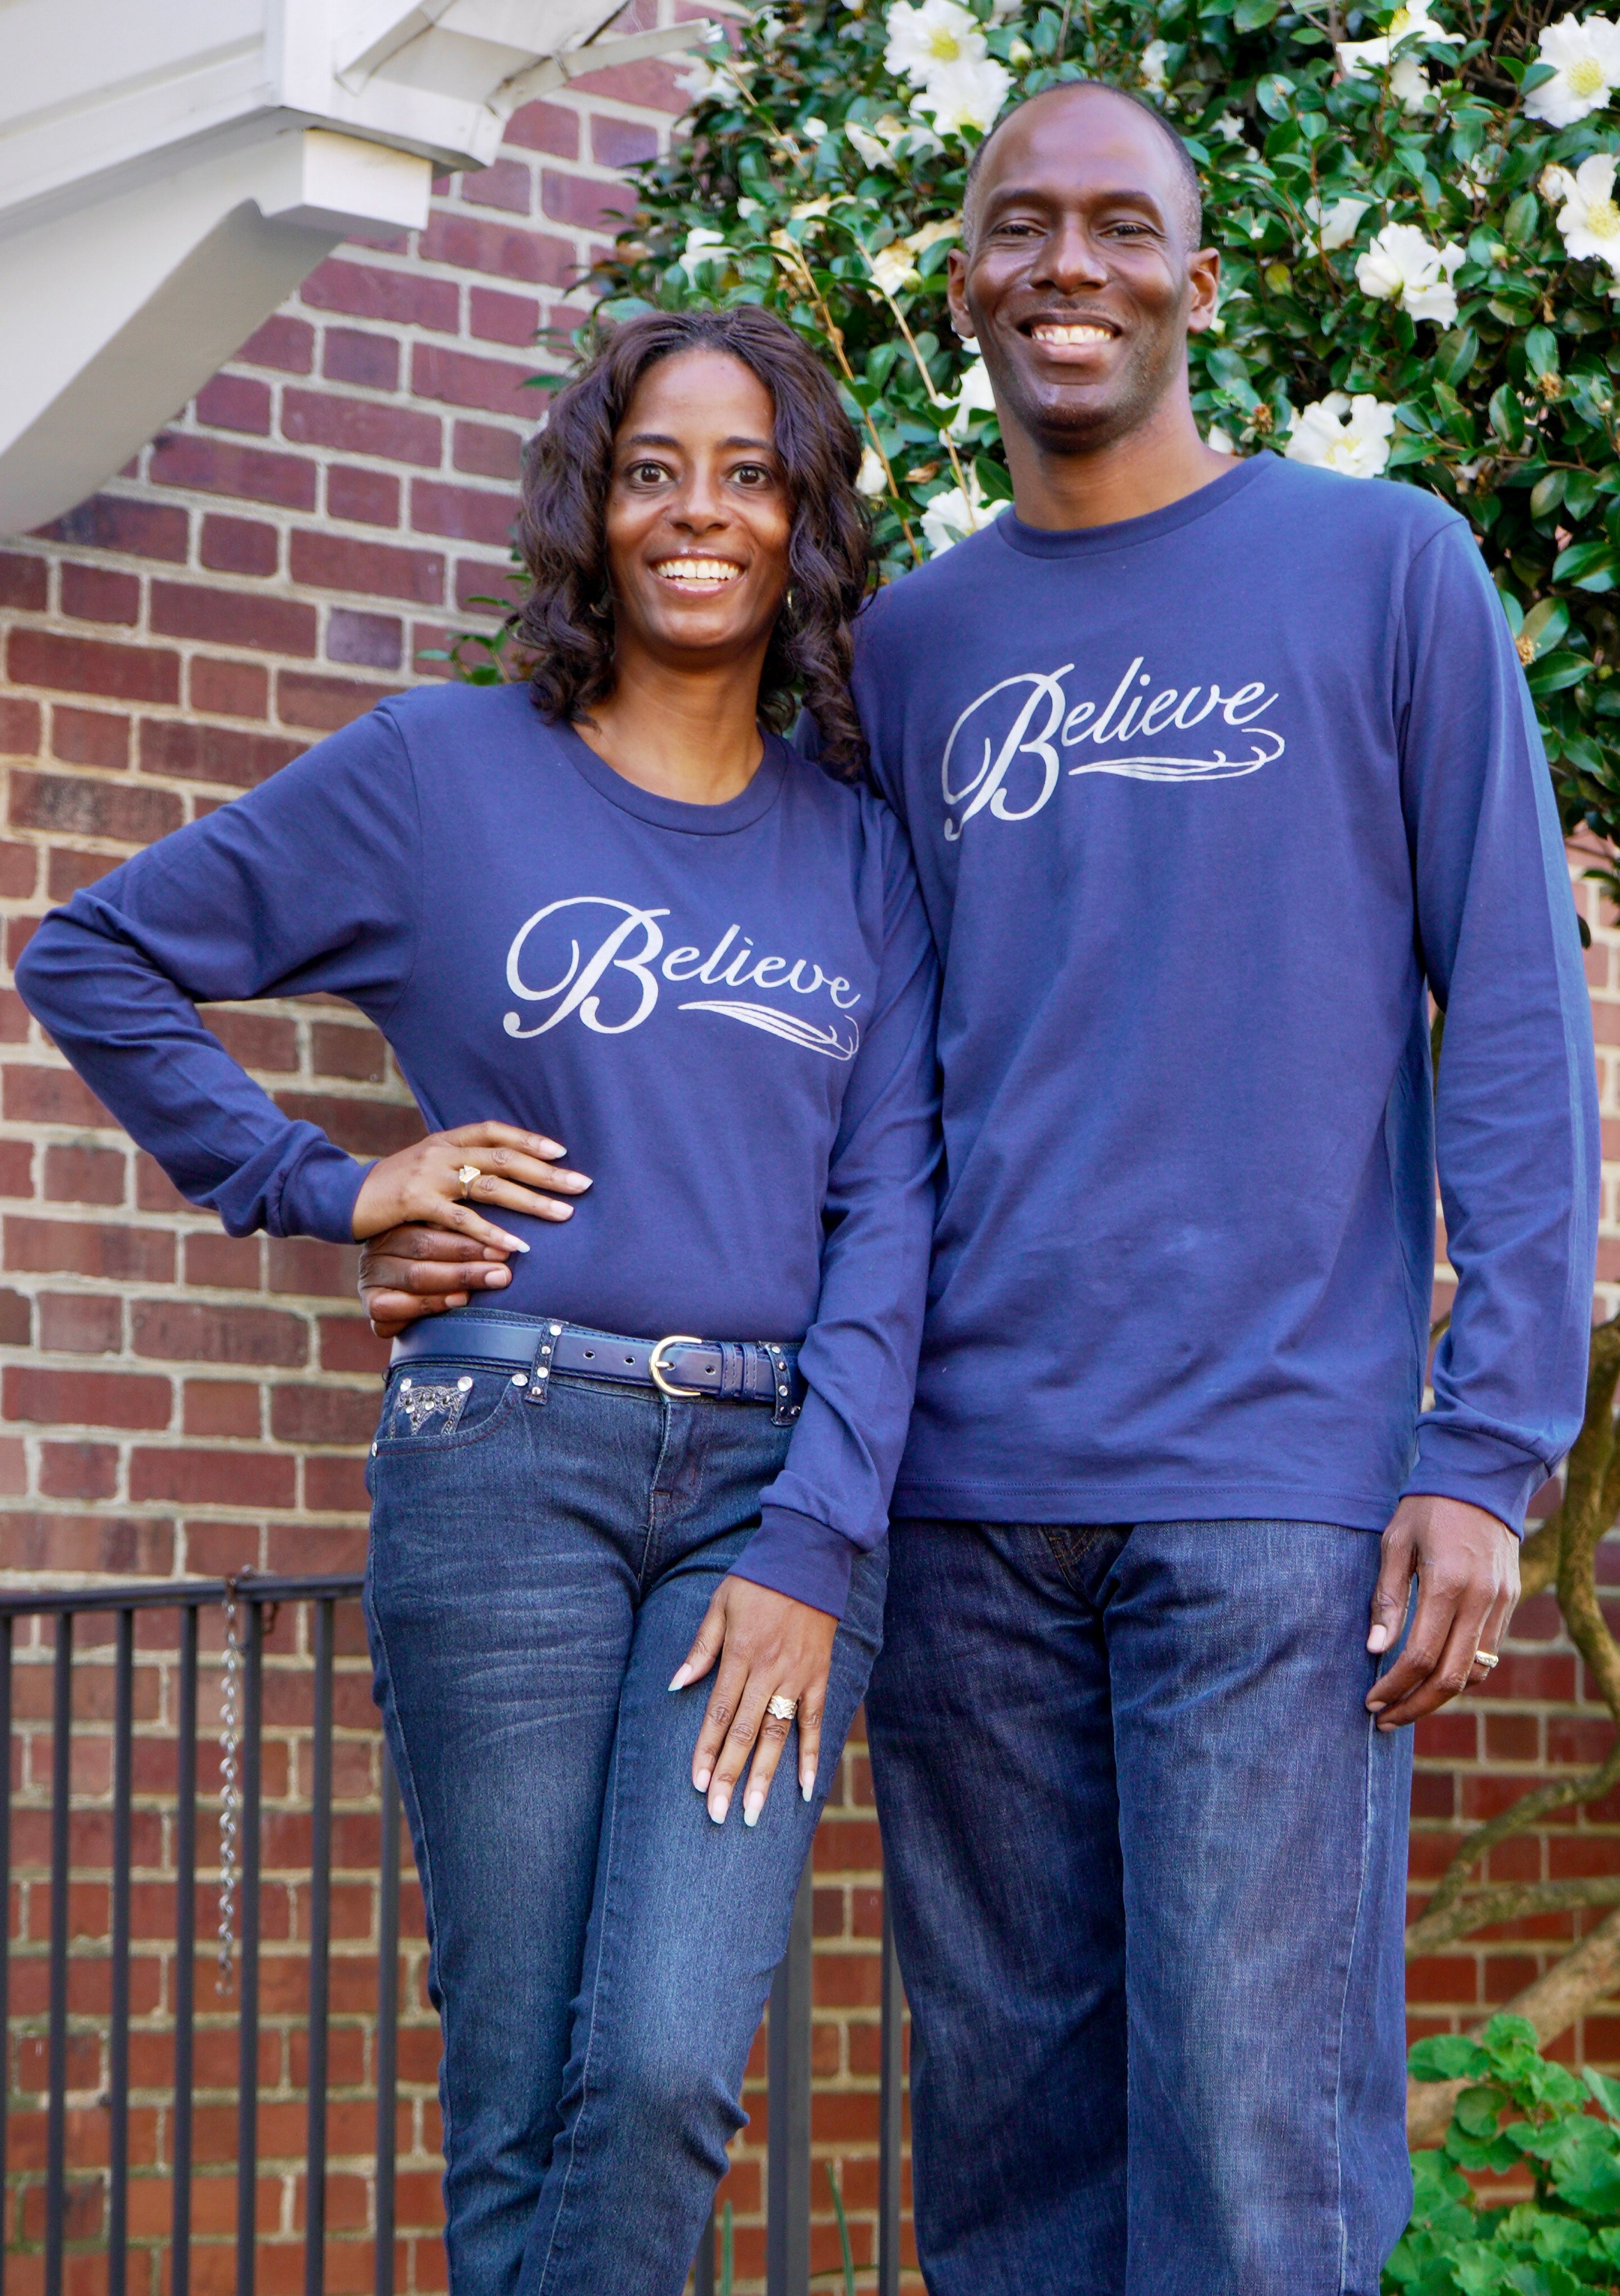 Believe Long Sleeve T-Shirt Blue and White - Jewellery Unique Gifts & Accessories